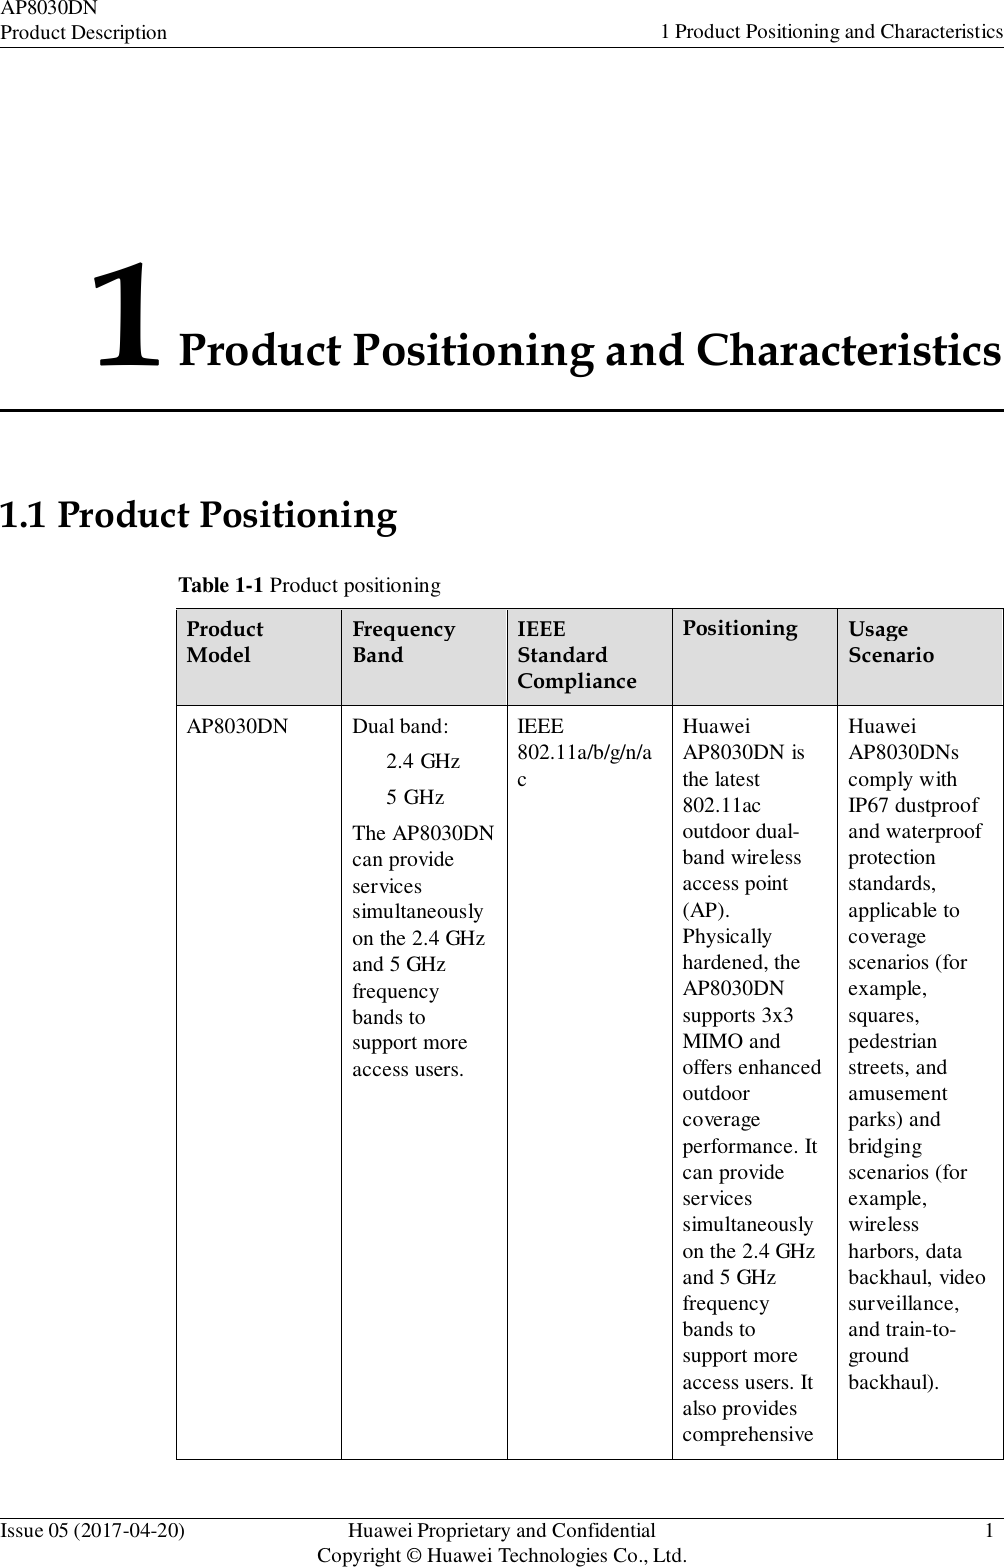 AP8030DN Product Description 1 Product Positioning and Characteristics Issue 05 (2017-04-20) Huawei Proprietary and Confidential Copyright © Huawei Technologies Co., Ltd. 1    1Product Positioning and Characteristics     1.1 Product Positioning  Table 1-1 Product positioning  Product Model Frequency Band IEEE Standard Compliance Positioning Usage Scenario AP8030DN Dual band: 2.4 GHz 5 GHz The AP8030DN can provide services simultaneously on the 2.4 GHz and 5 GHz frequency bands to support more access users. IEEE 802.11a/b/g/n/a c Huawei AP8030DN is the latest 802.11ac outdoor dual- band wireless access point (AP). Physically hardened, the AP8030DN supports 3x3 MIMO and offers enhanced outdoor coverage performance. It can provide services simultaneously on the 2.4 GHz and 5 GHz frequency bands to support more access users. It also provides comprehensive Huawei AP8030DNs comply with IP67 dustproof and waterproof protection standards, applicable to coverage scenarios (for example, squares, pedestrian streets, and amusement parks) and bridging scenarios (for example, wireless harbors, data backhaul, video surveillance, and train-to- ground backhaul). 